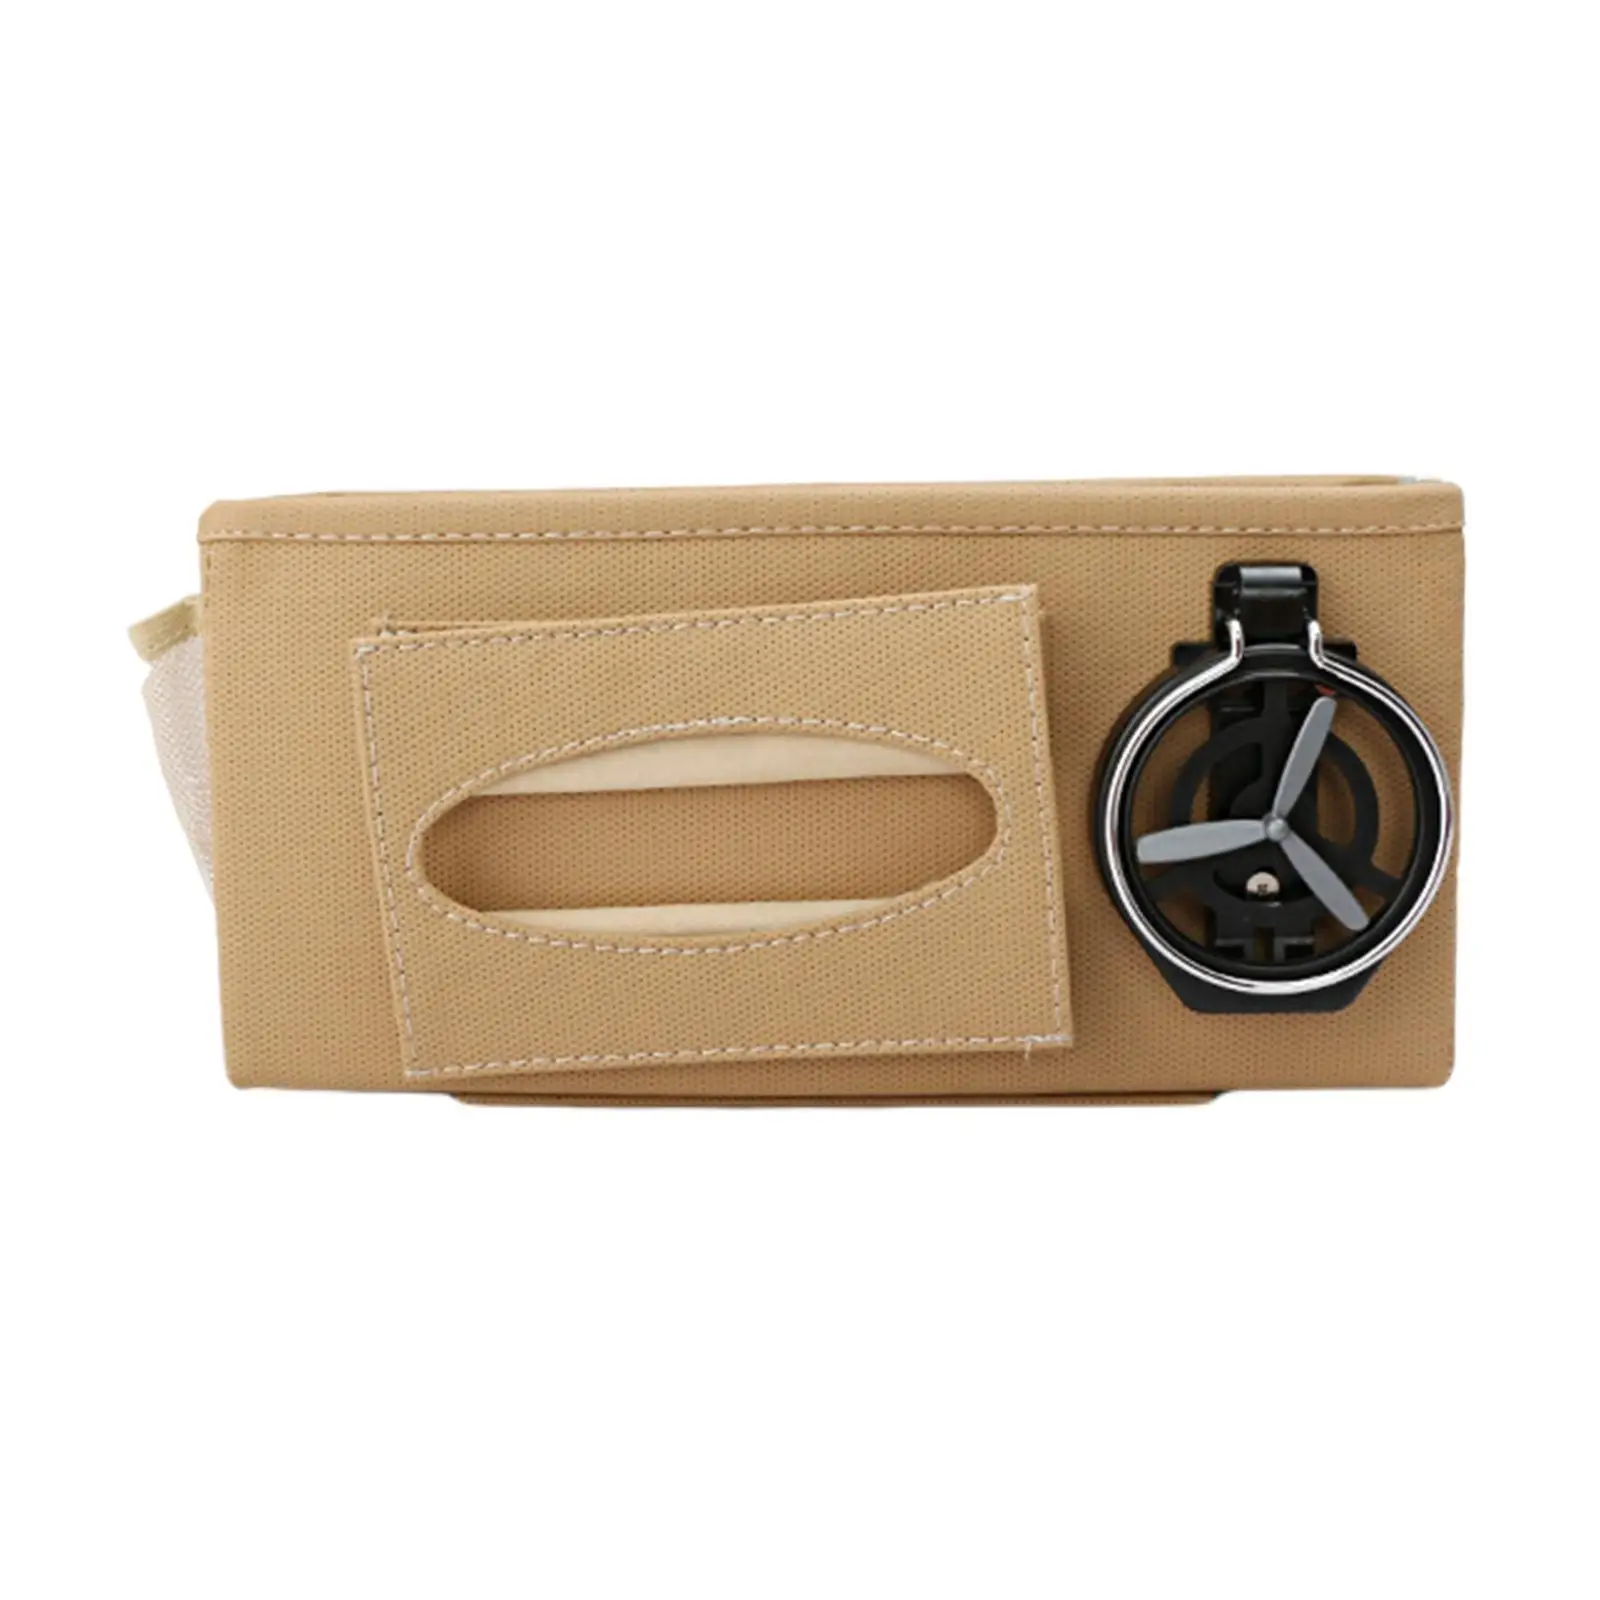 Car Leather Seat Back Organizer with Cup Holder for Phone Tissue Small Items